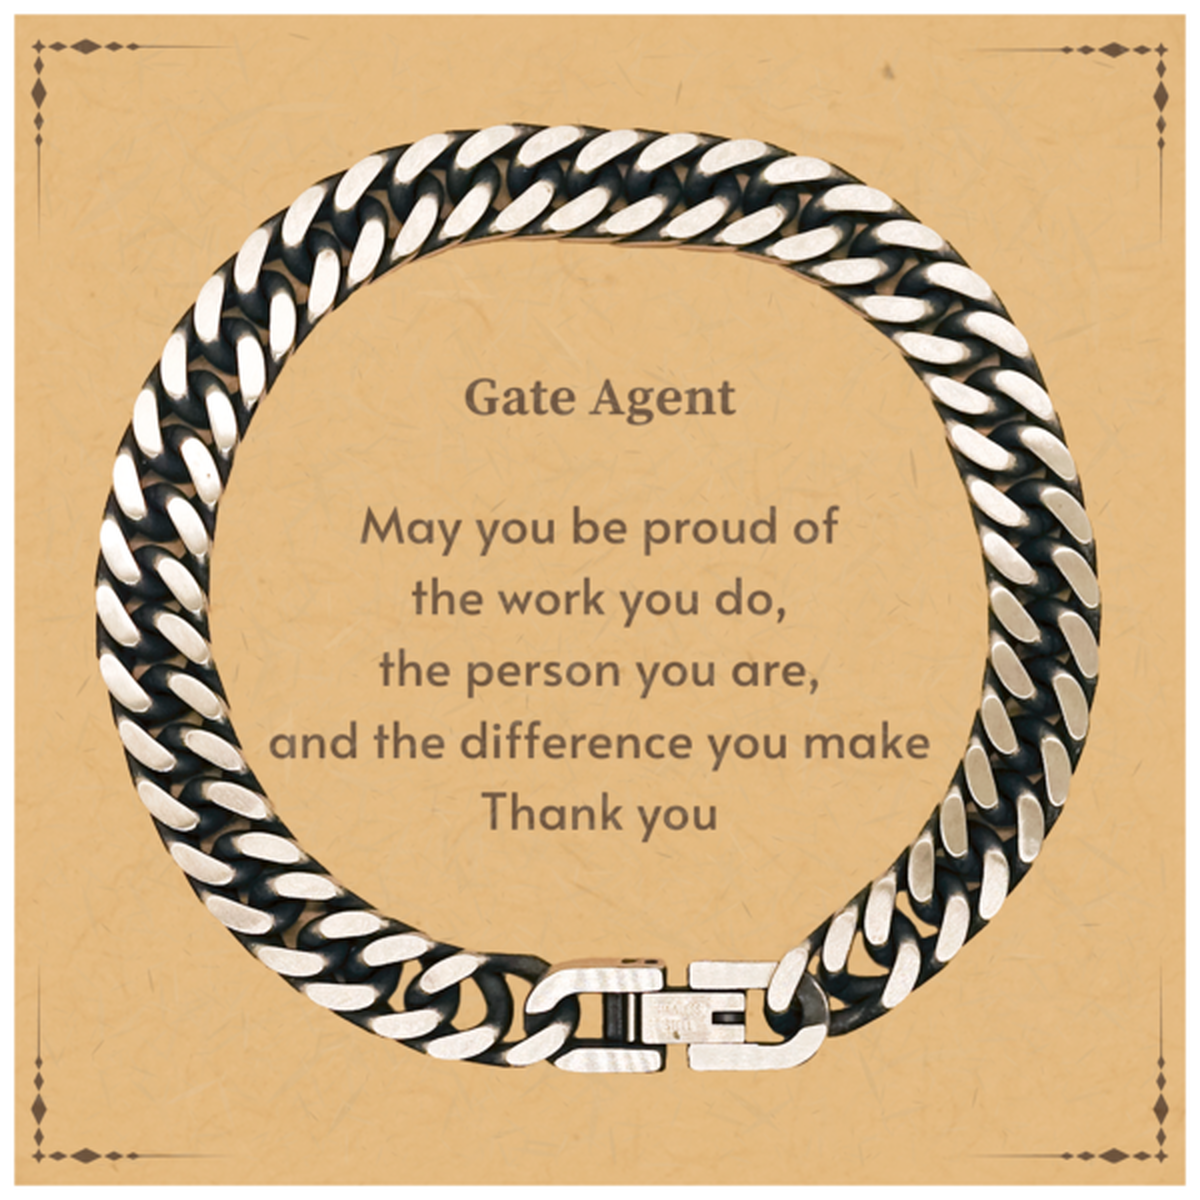 Heartwarming Cuban Link Chain Bracelet Retirement Coworkers Gifts for Gate Agent, Gate Agent May You be proud of the work you do, the person you are Gifts for Boss Men Women Friends